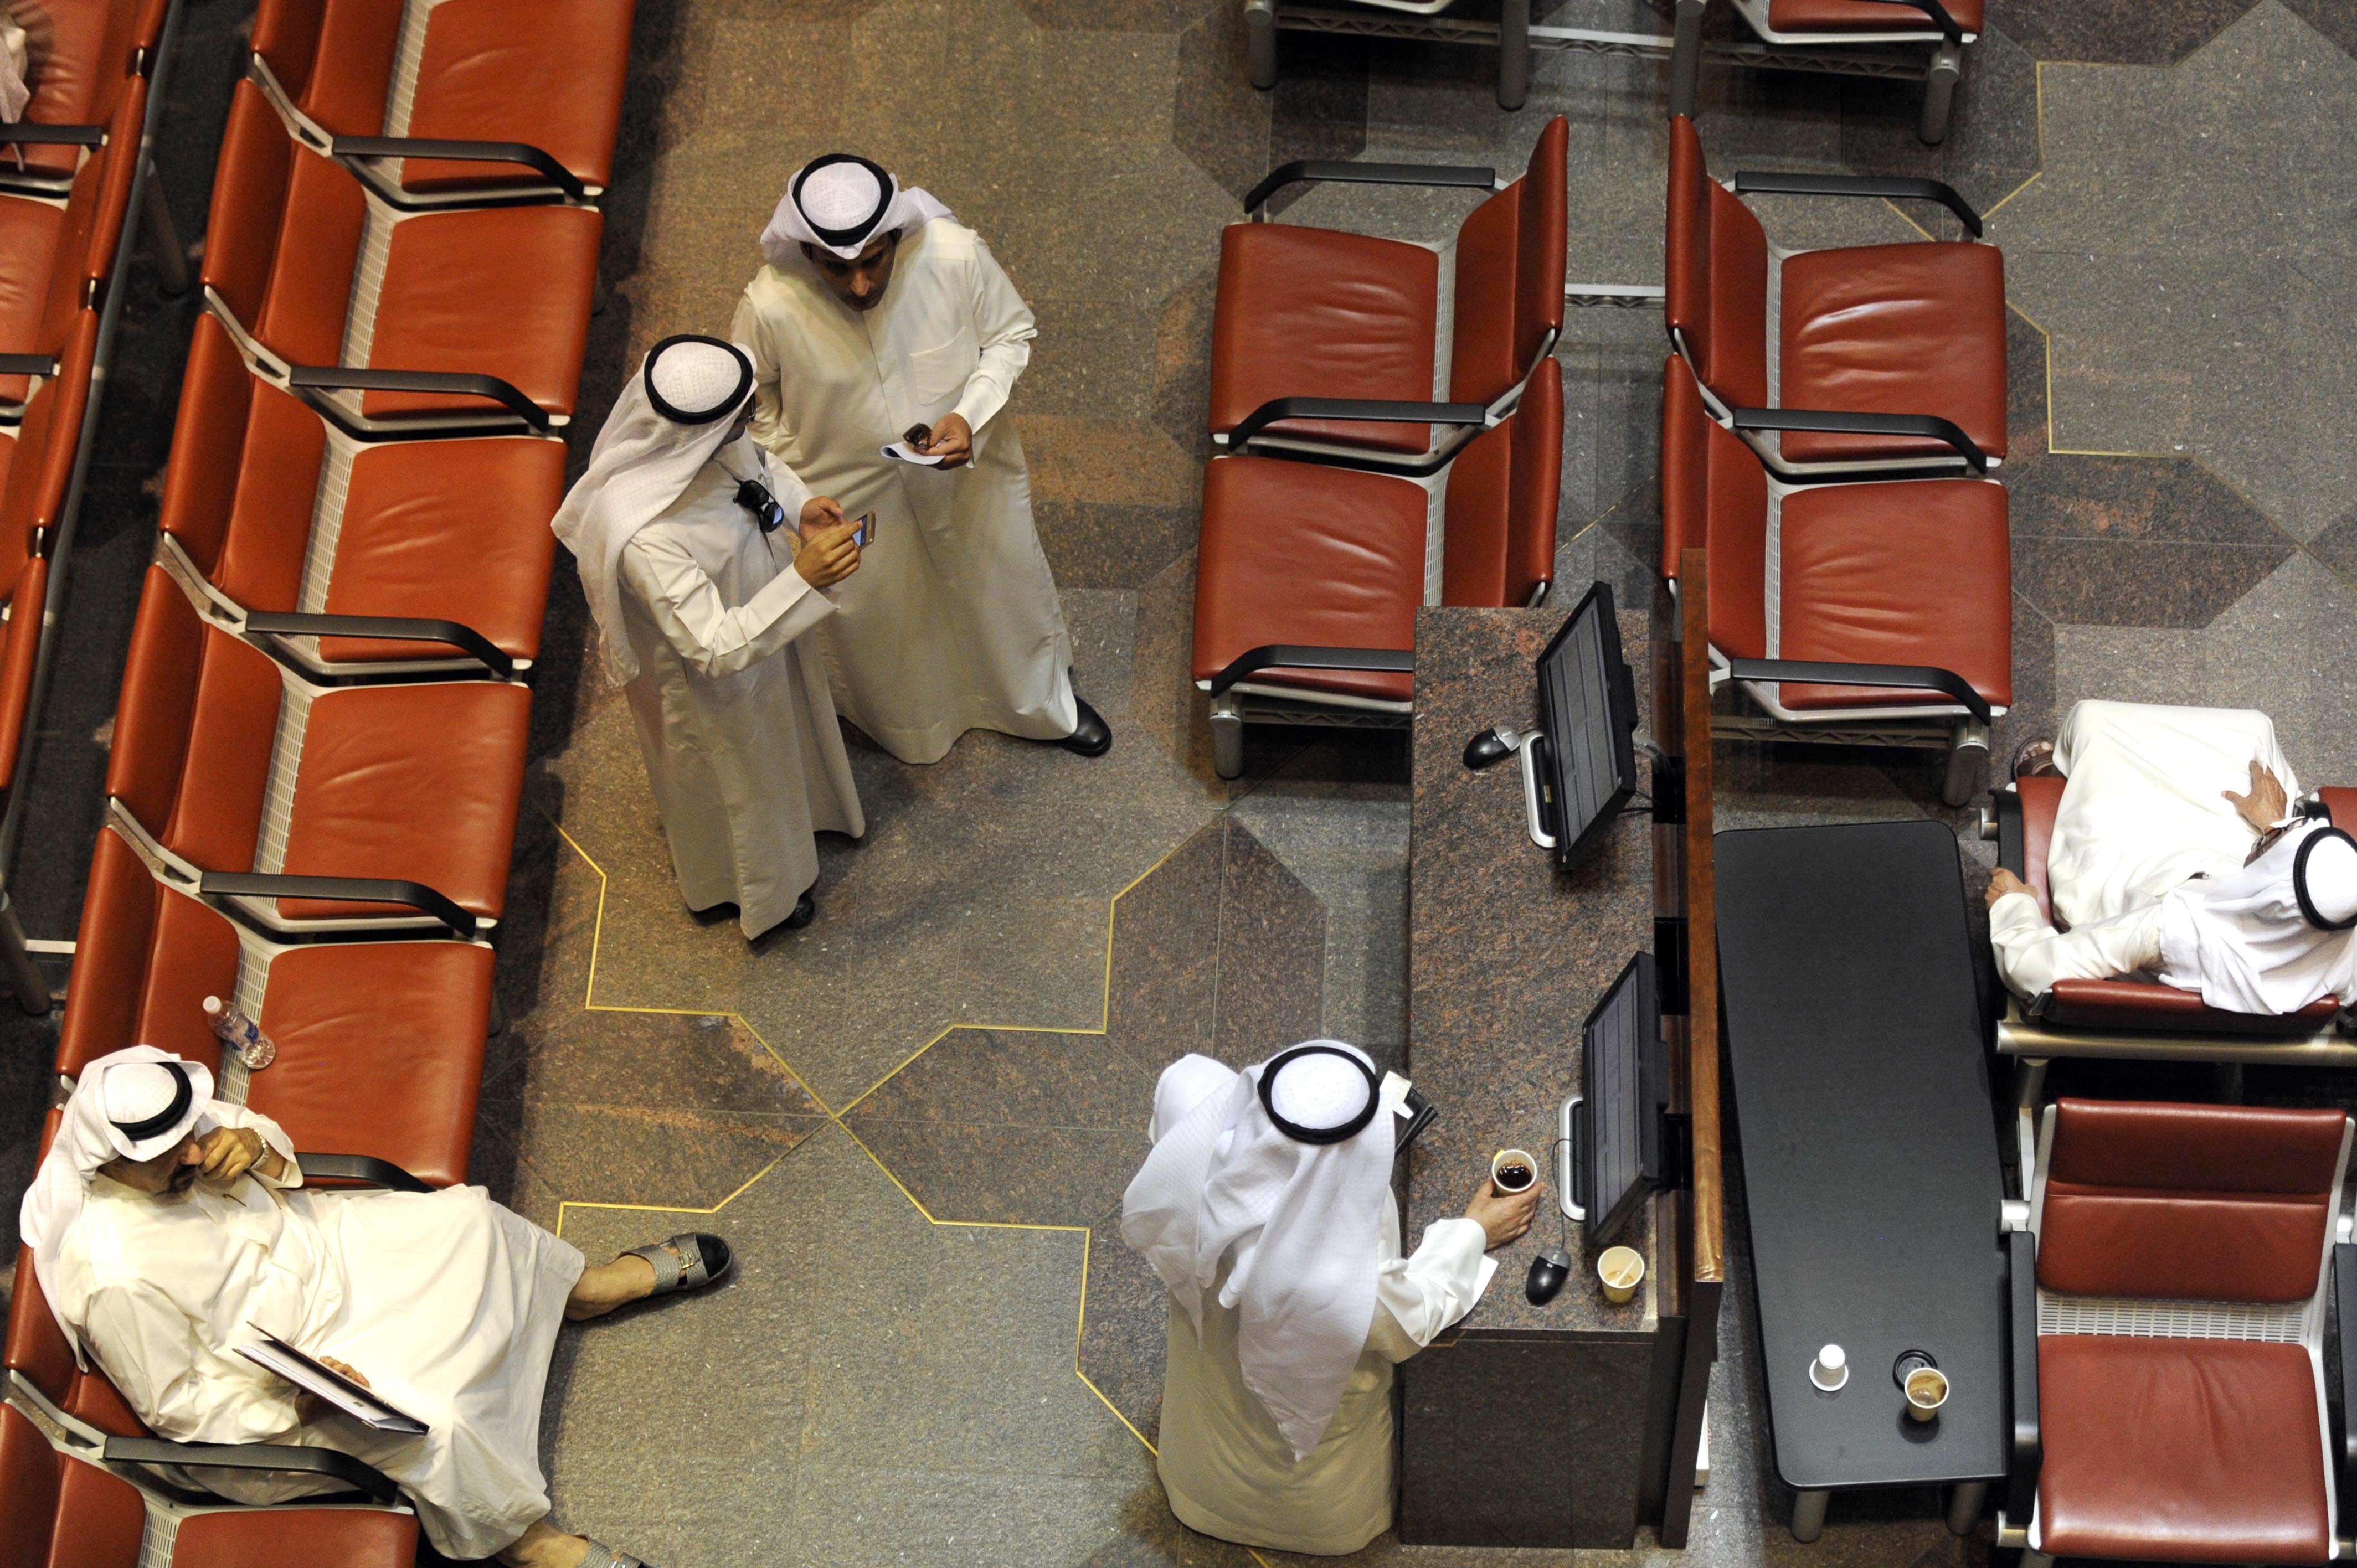 Kuwait bourse ends Tuesday trading with mixed boards                                                                                                                                                                                                      